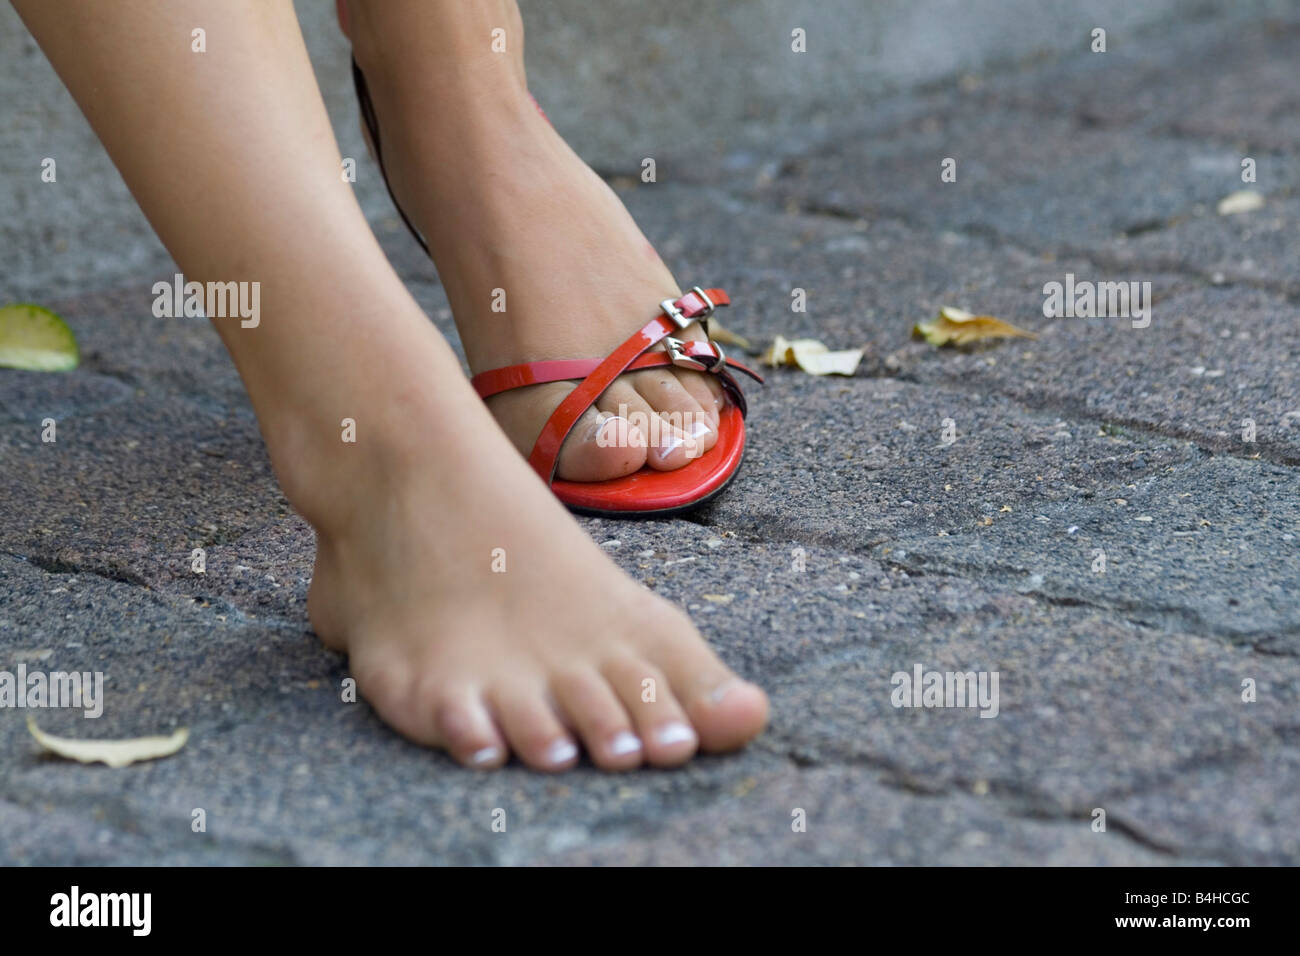 Low section view of woman taking of her sandal Stock Photo